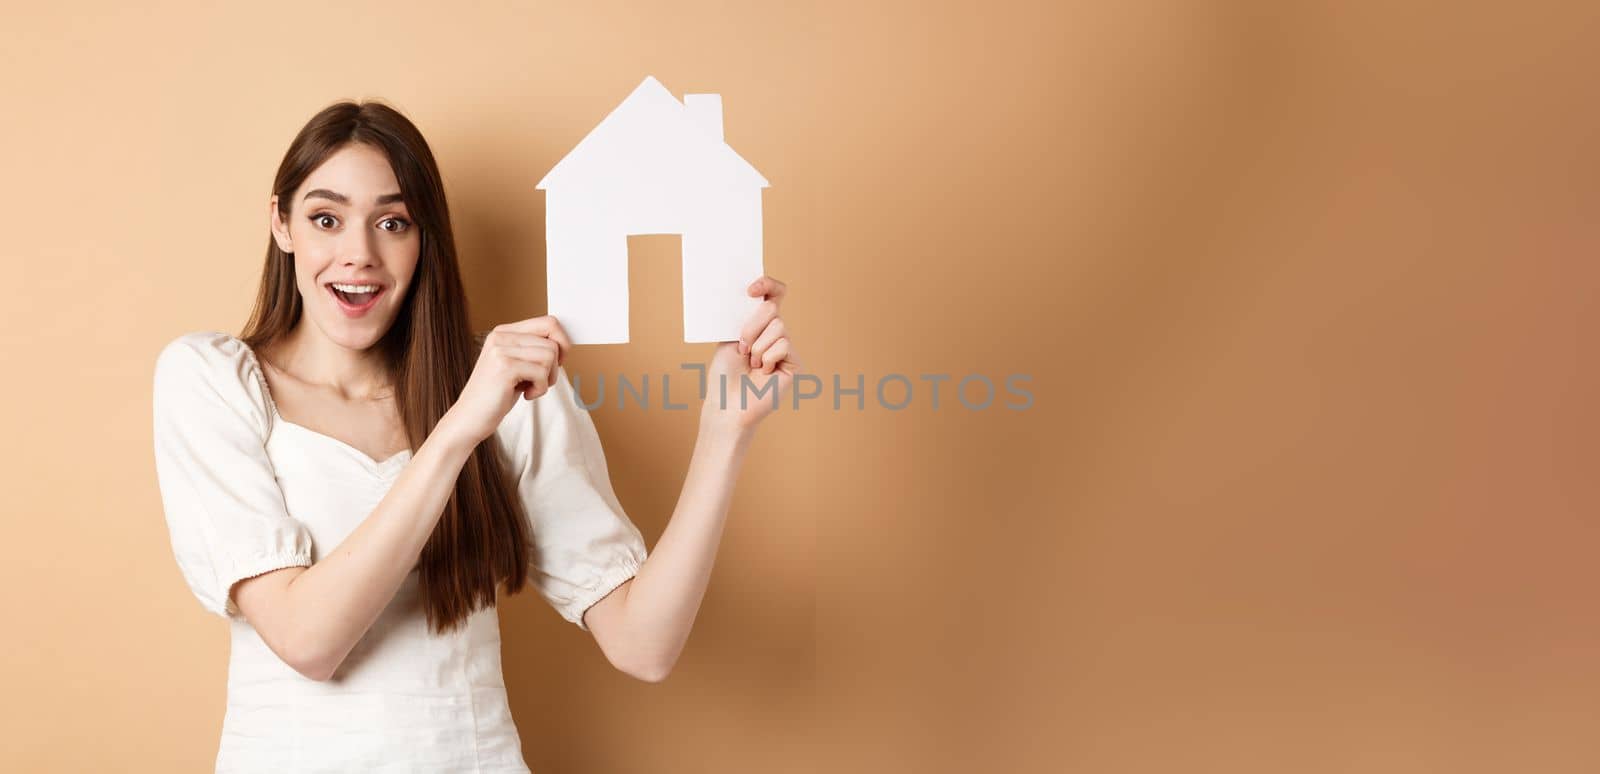 Real estate. Excited woman got new apartment, showing paper house cutout and smiling happy, standing on beige background.